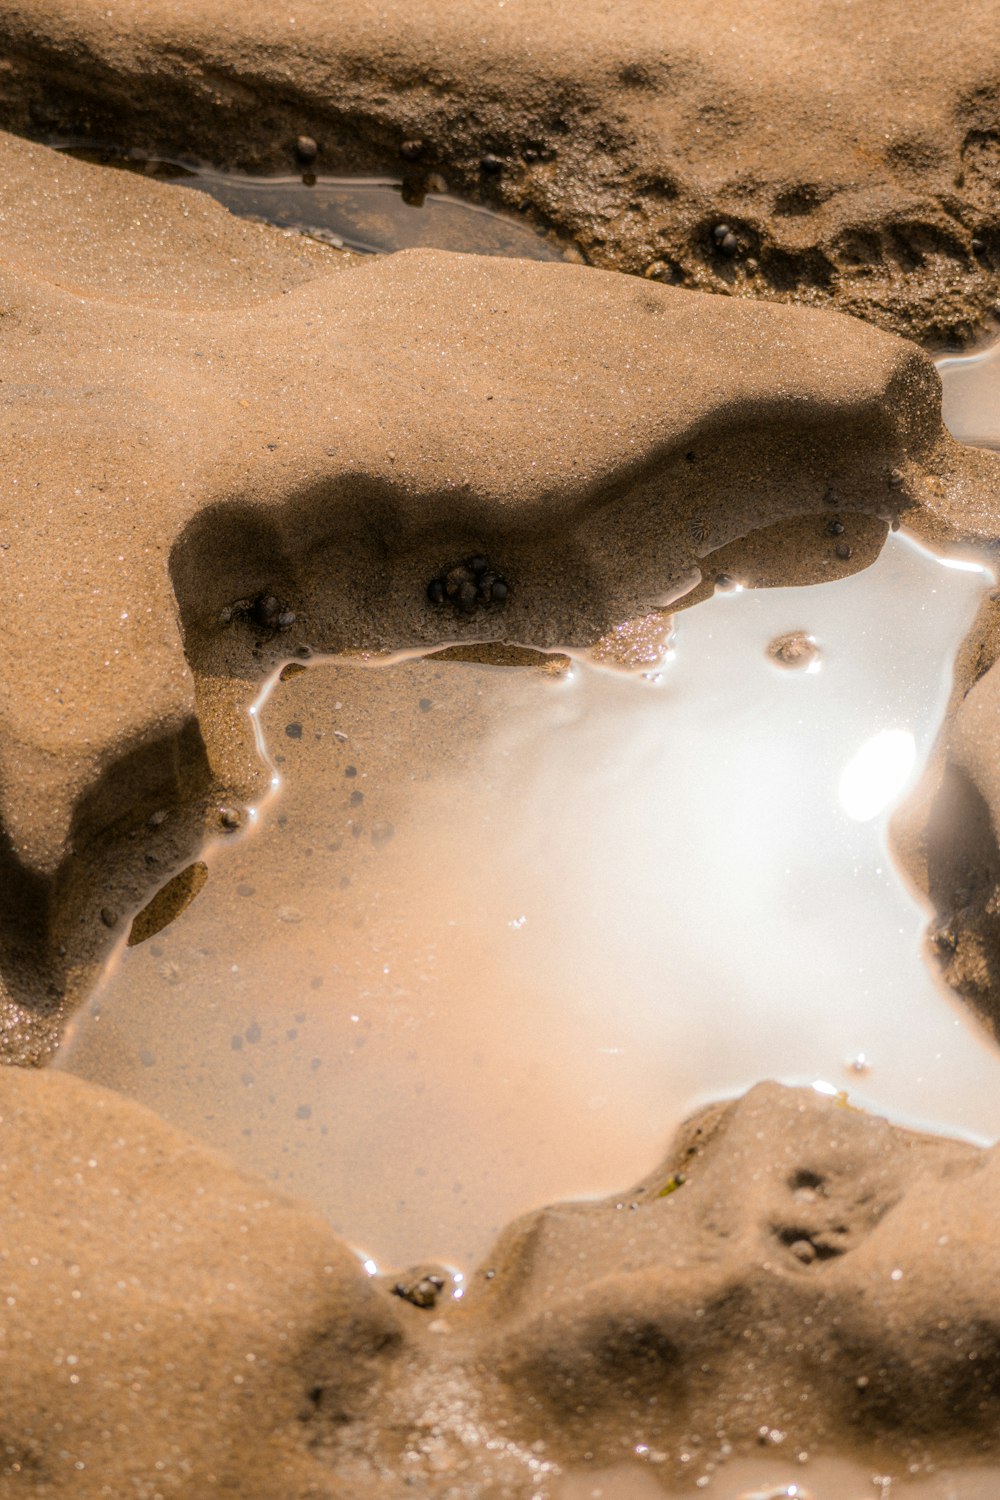 a small puddle of water in the sand